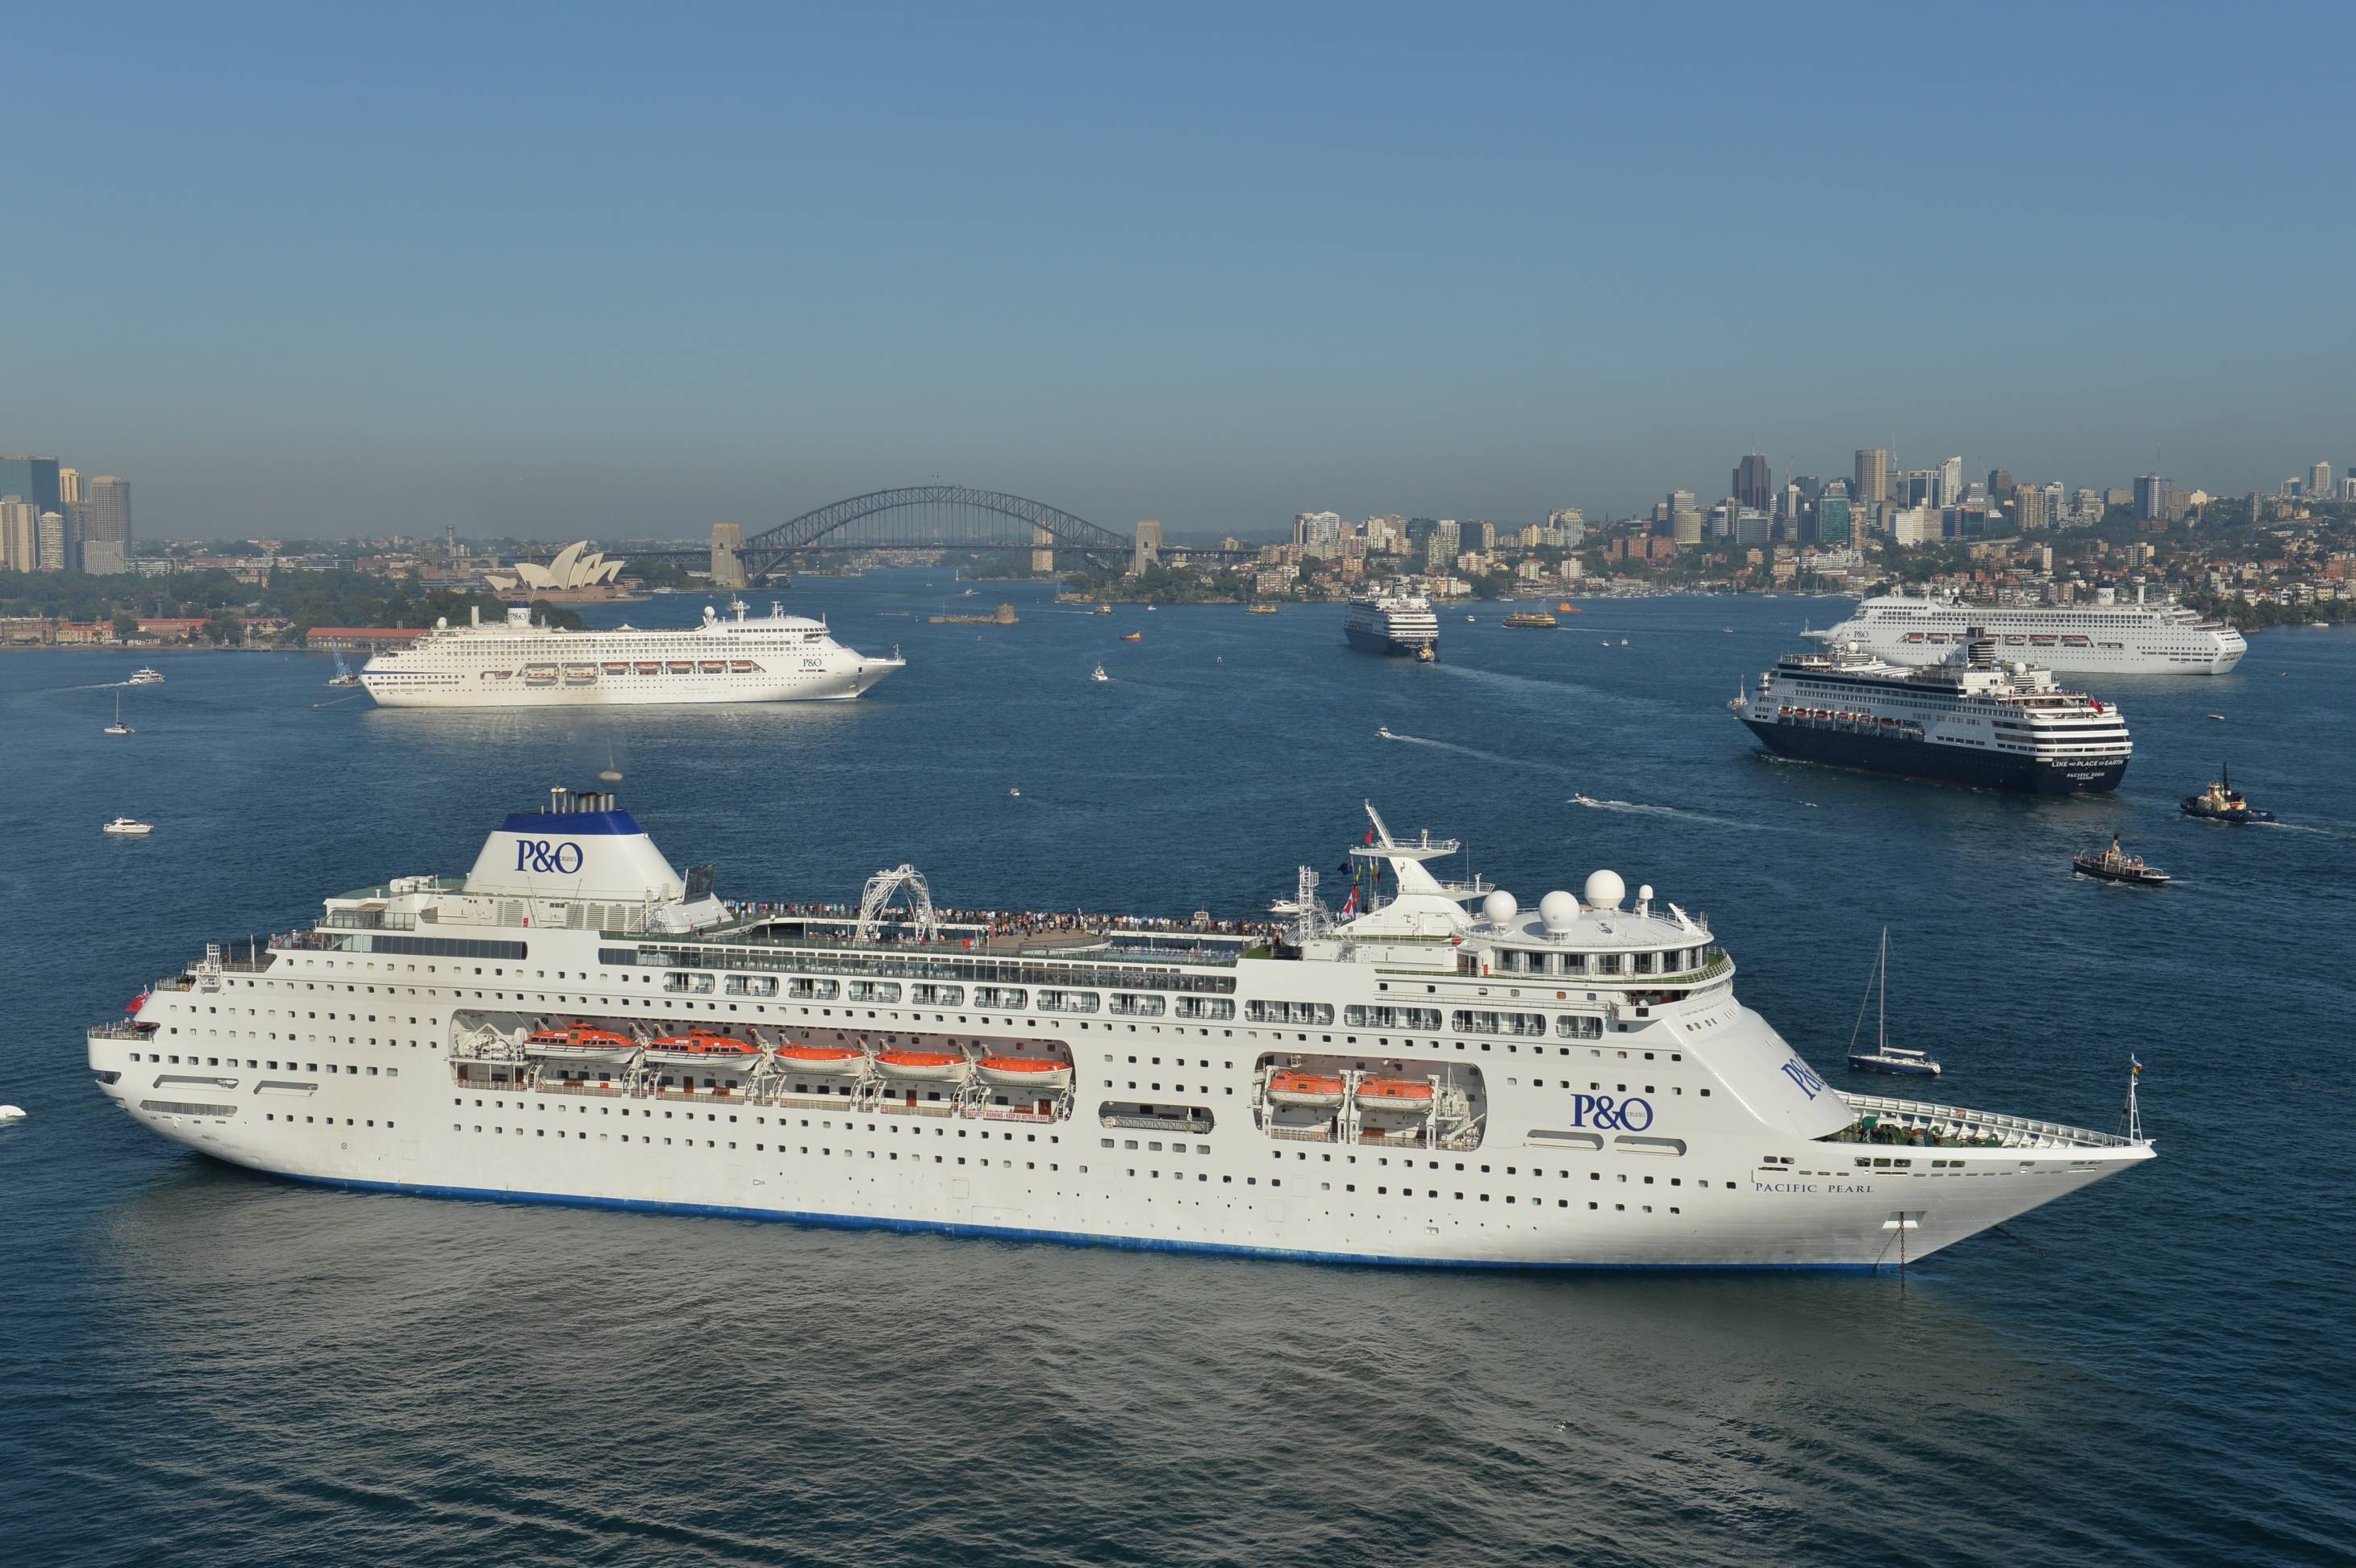 po cruises from melbourne